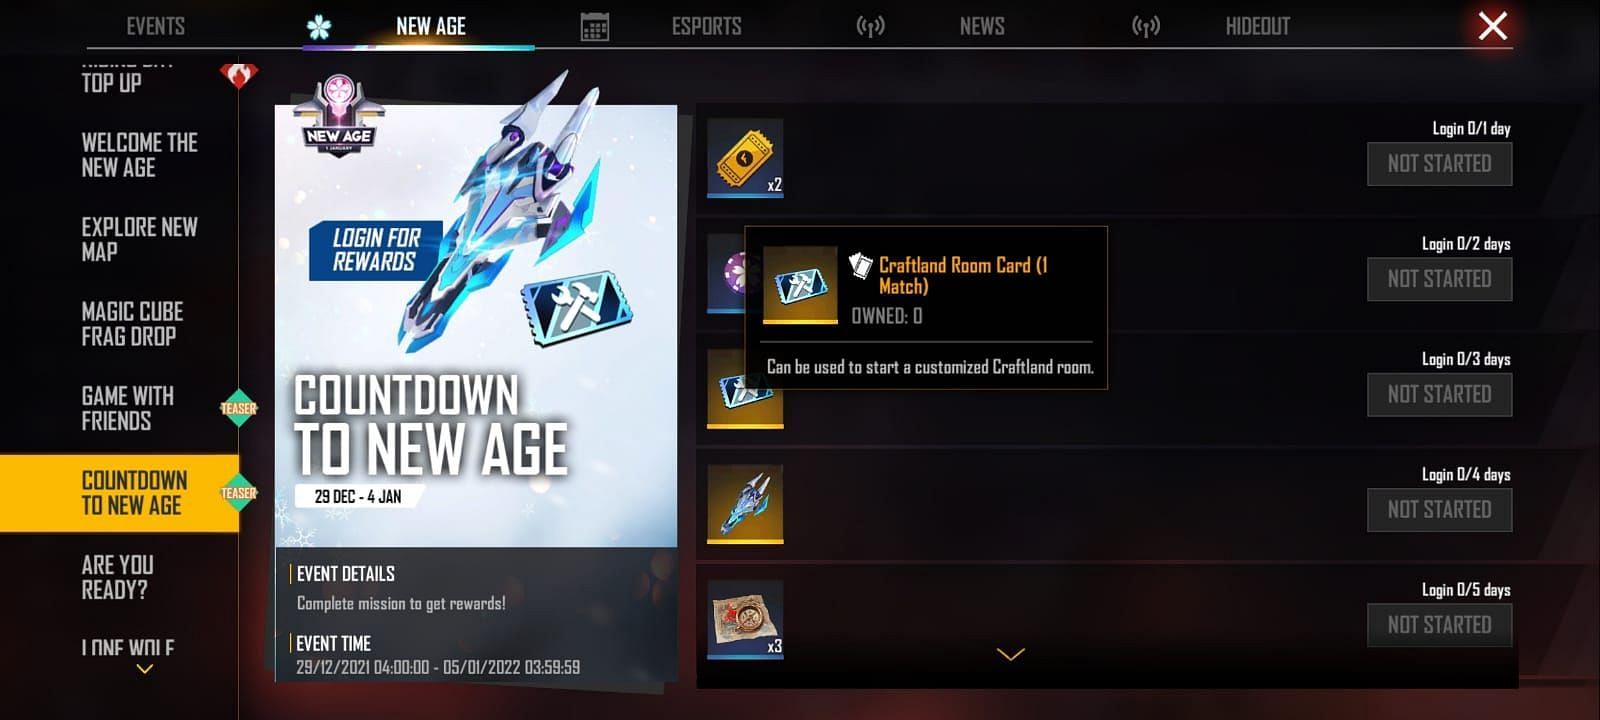 Free Room Card that players can claim by logging in (Image via Free Fire)